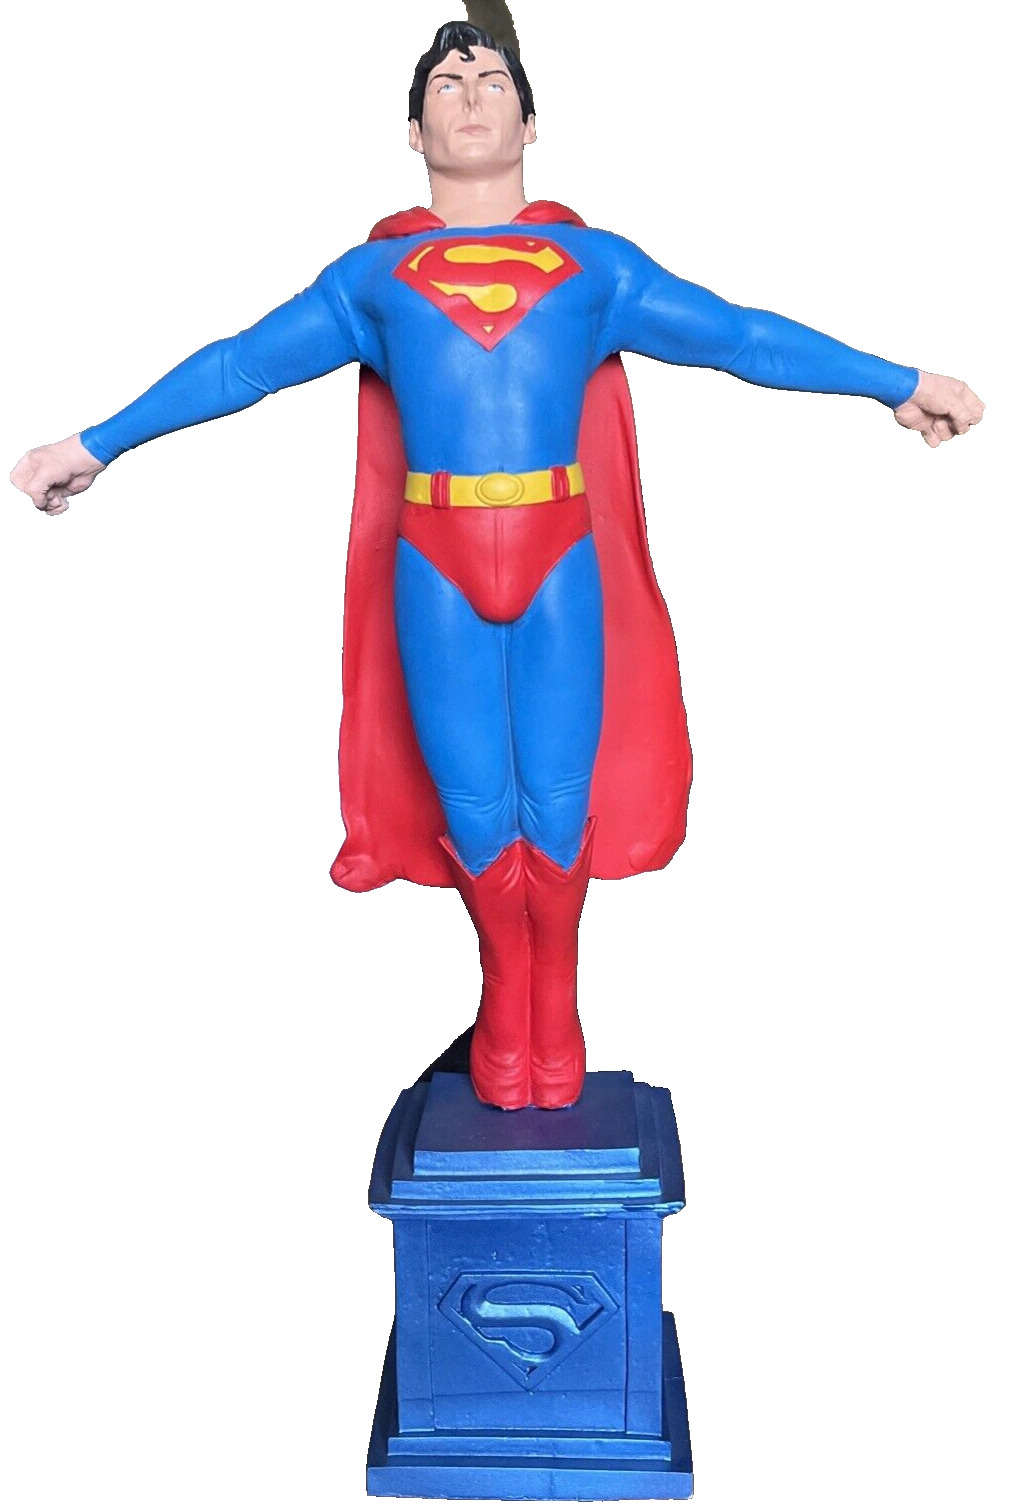 Superman Christopher Reeve 16in statue